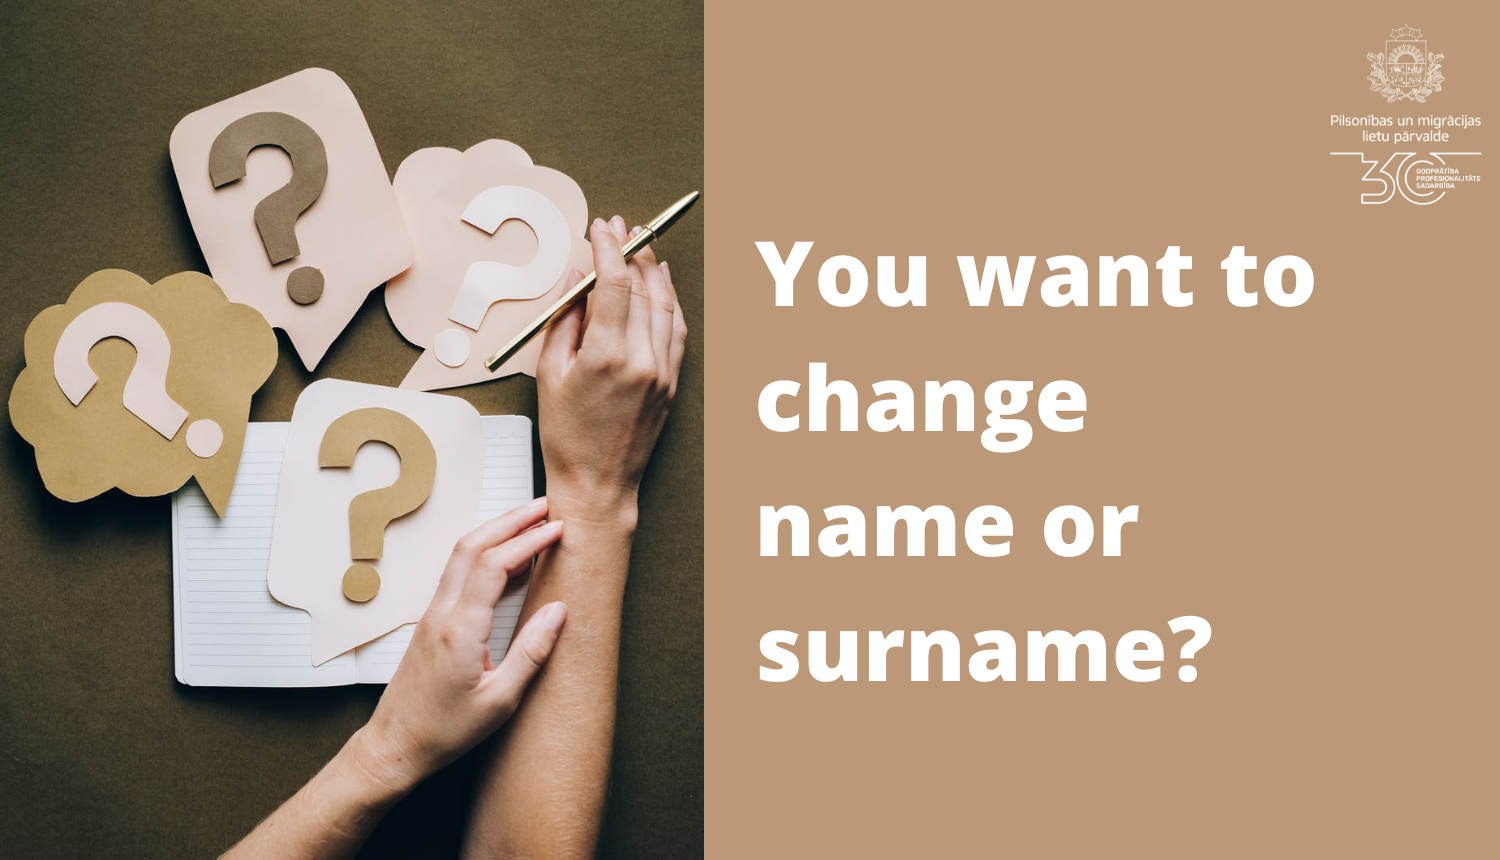 Do you want to change name or surname?